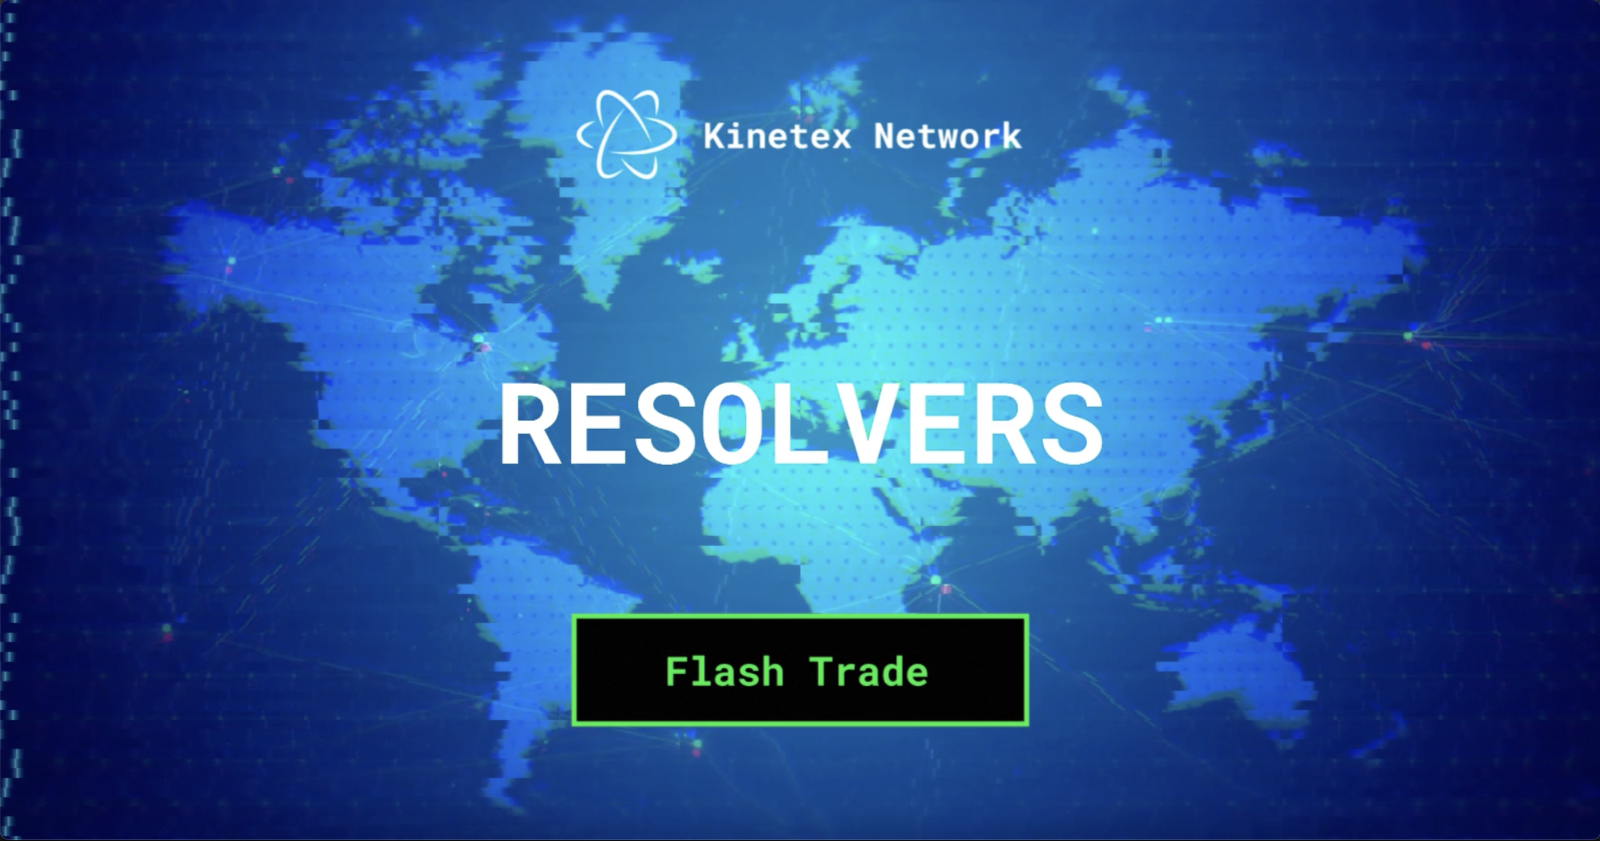 Flash Trade and Resolvers